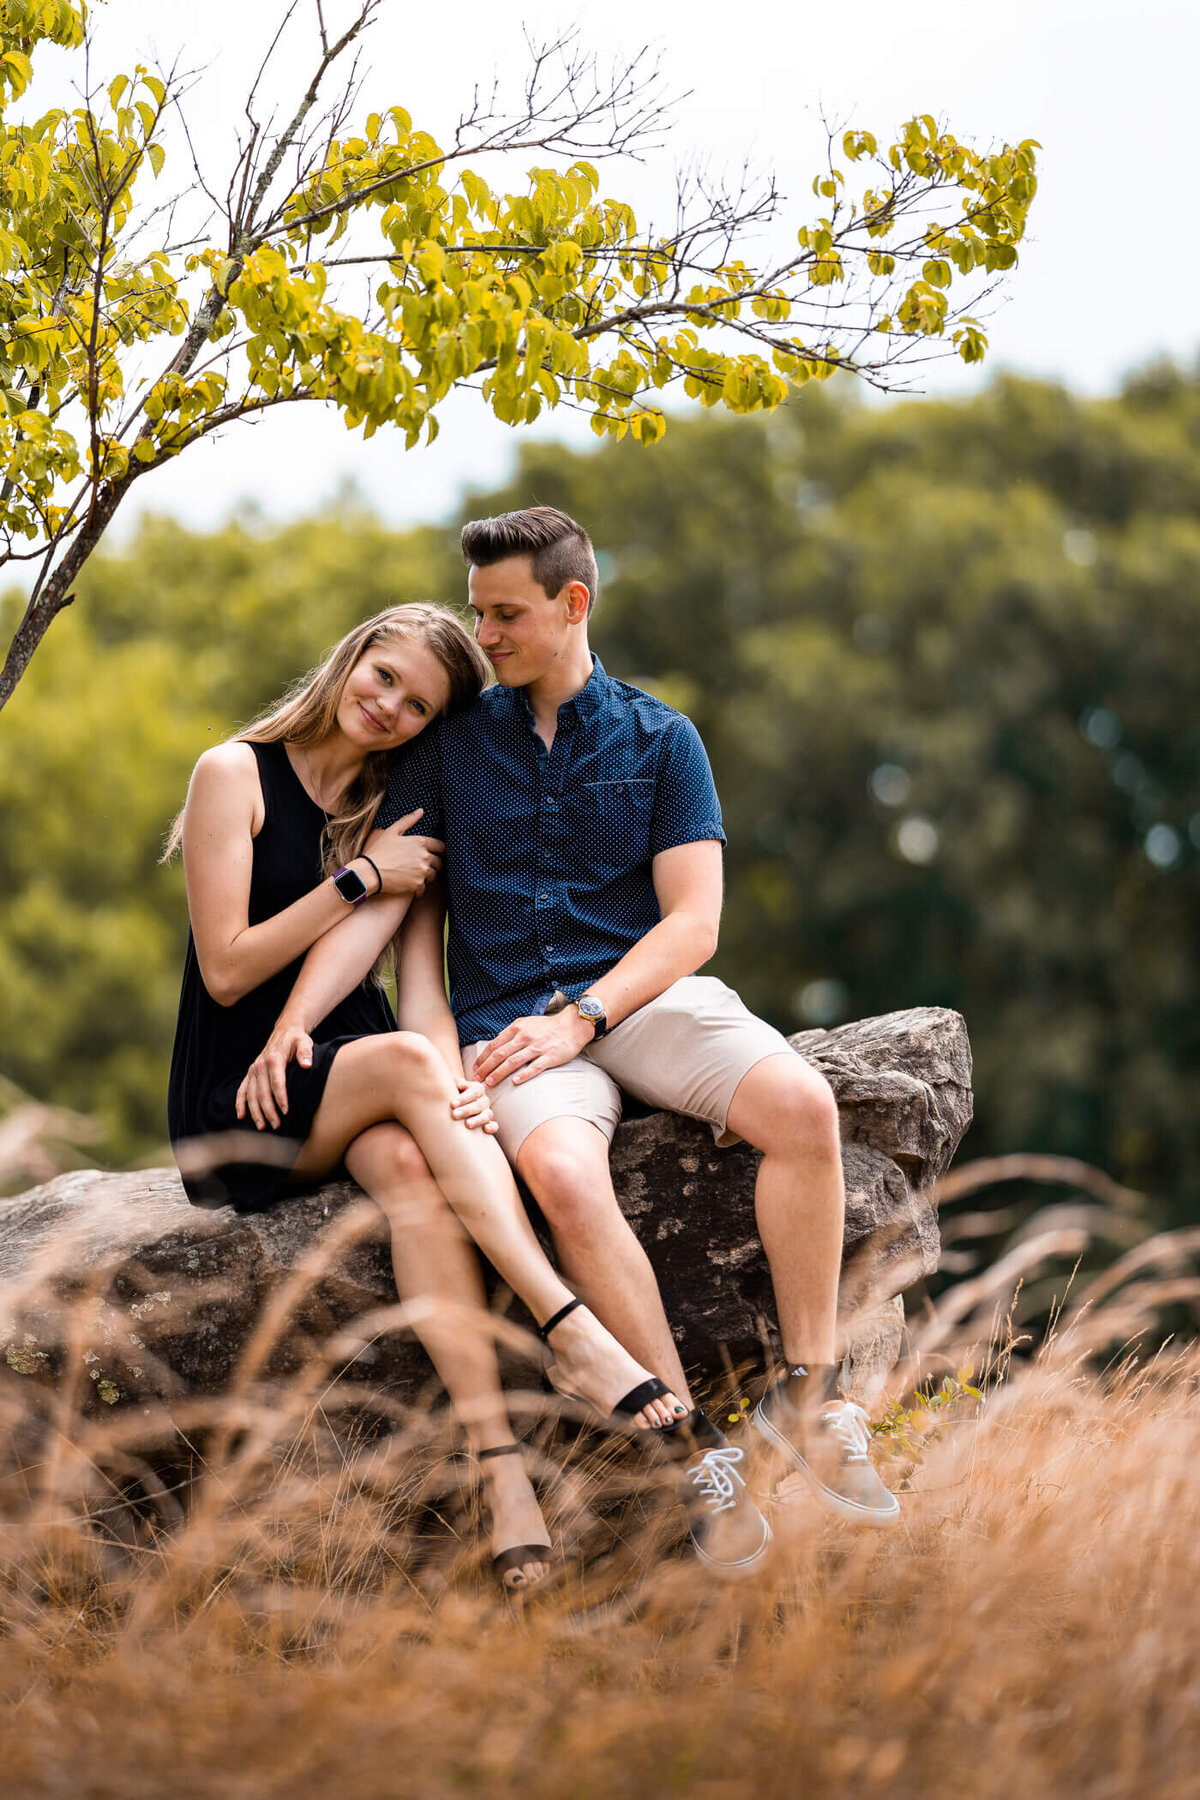 Outdoor portrait of Michael Fricke holding onto his fiancée and smiling while they sit on top of a rock surrounded by a wheat field